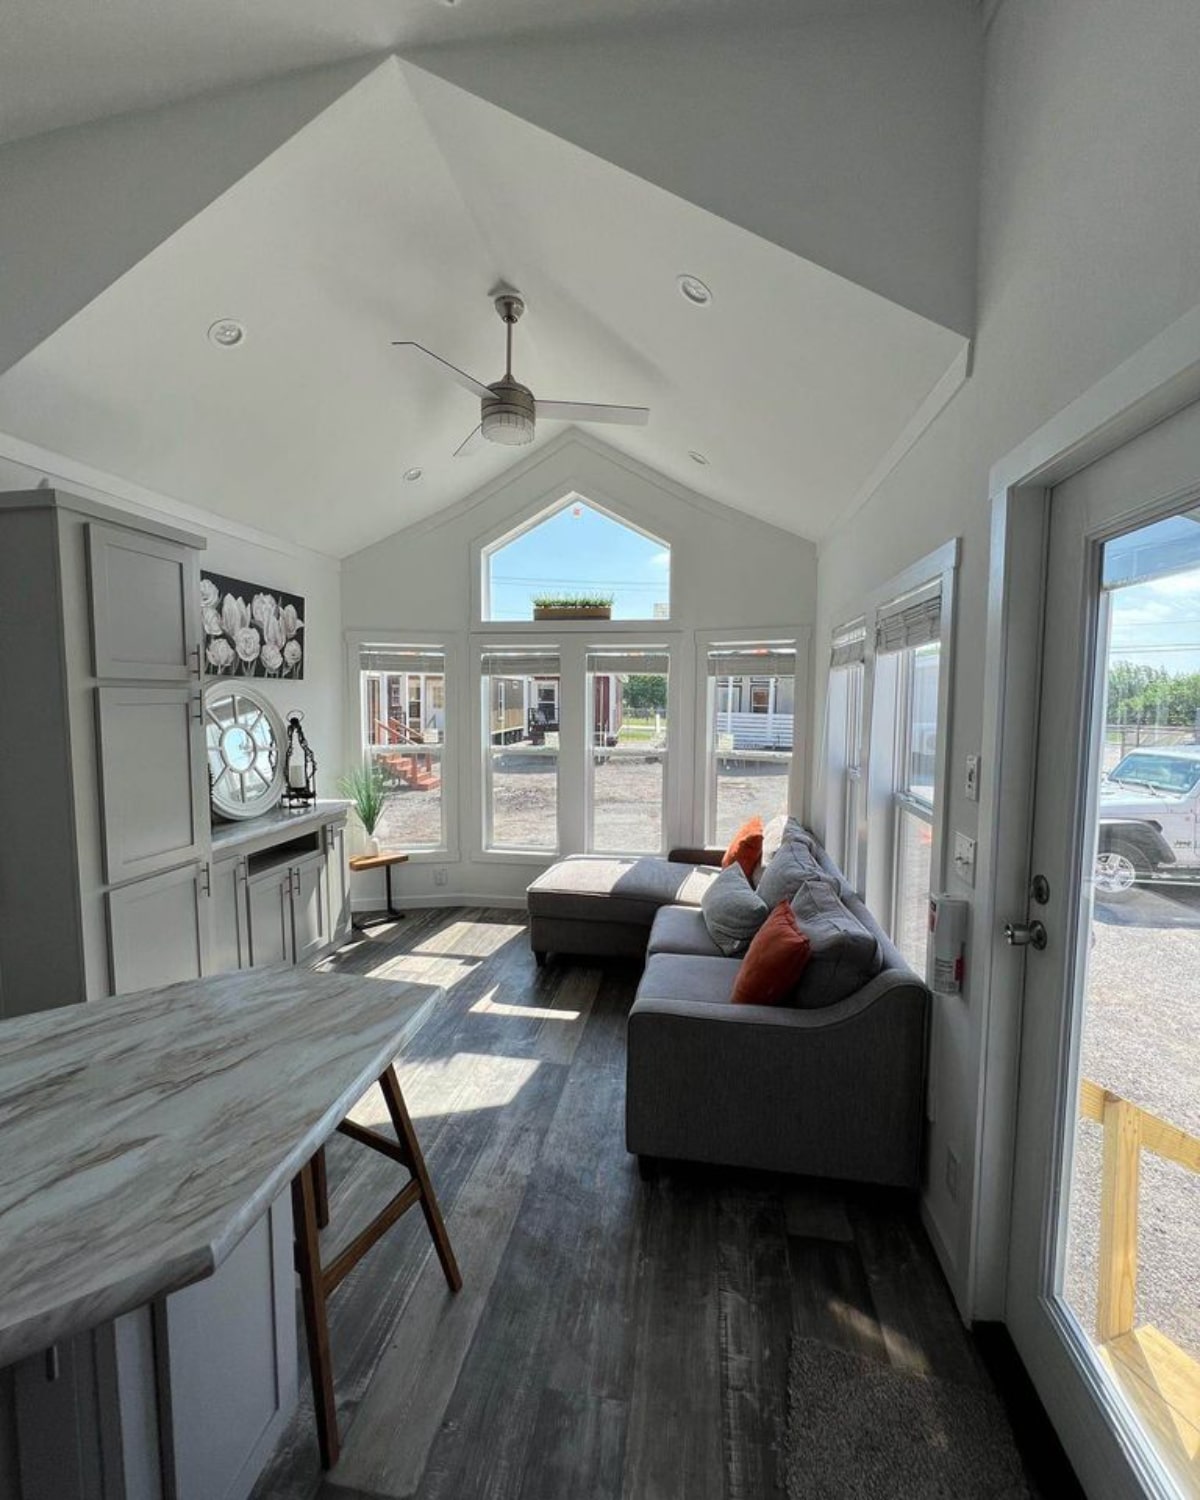 Spacious and bright living area of 399 sf Tiny House has a L shaped couch and wall cabinet with big windows